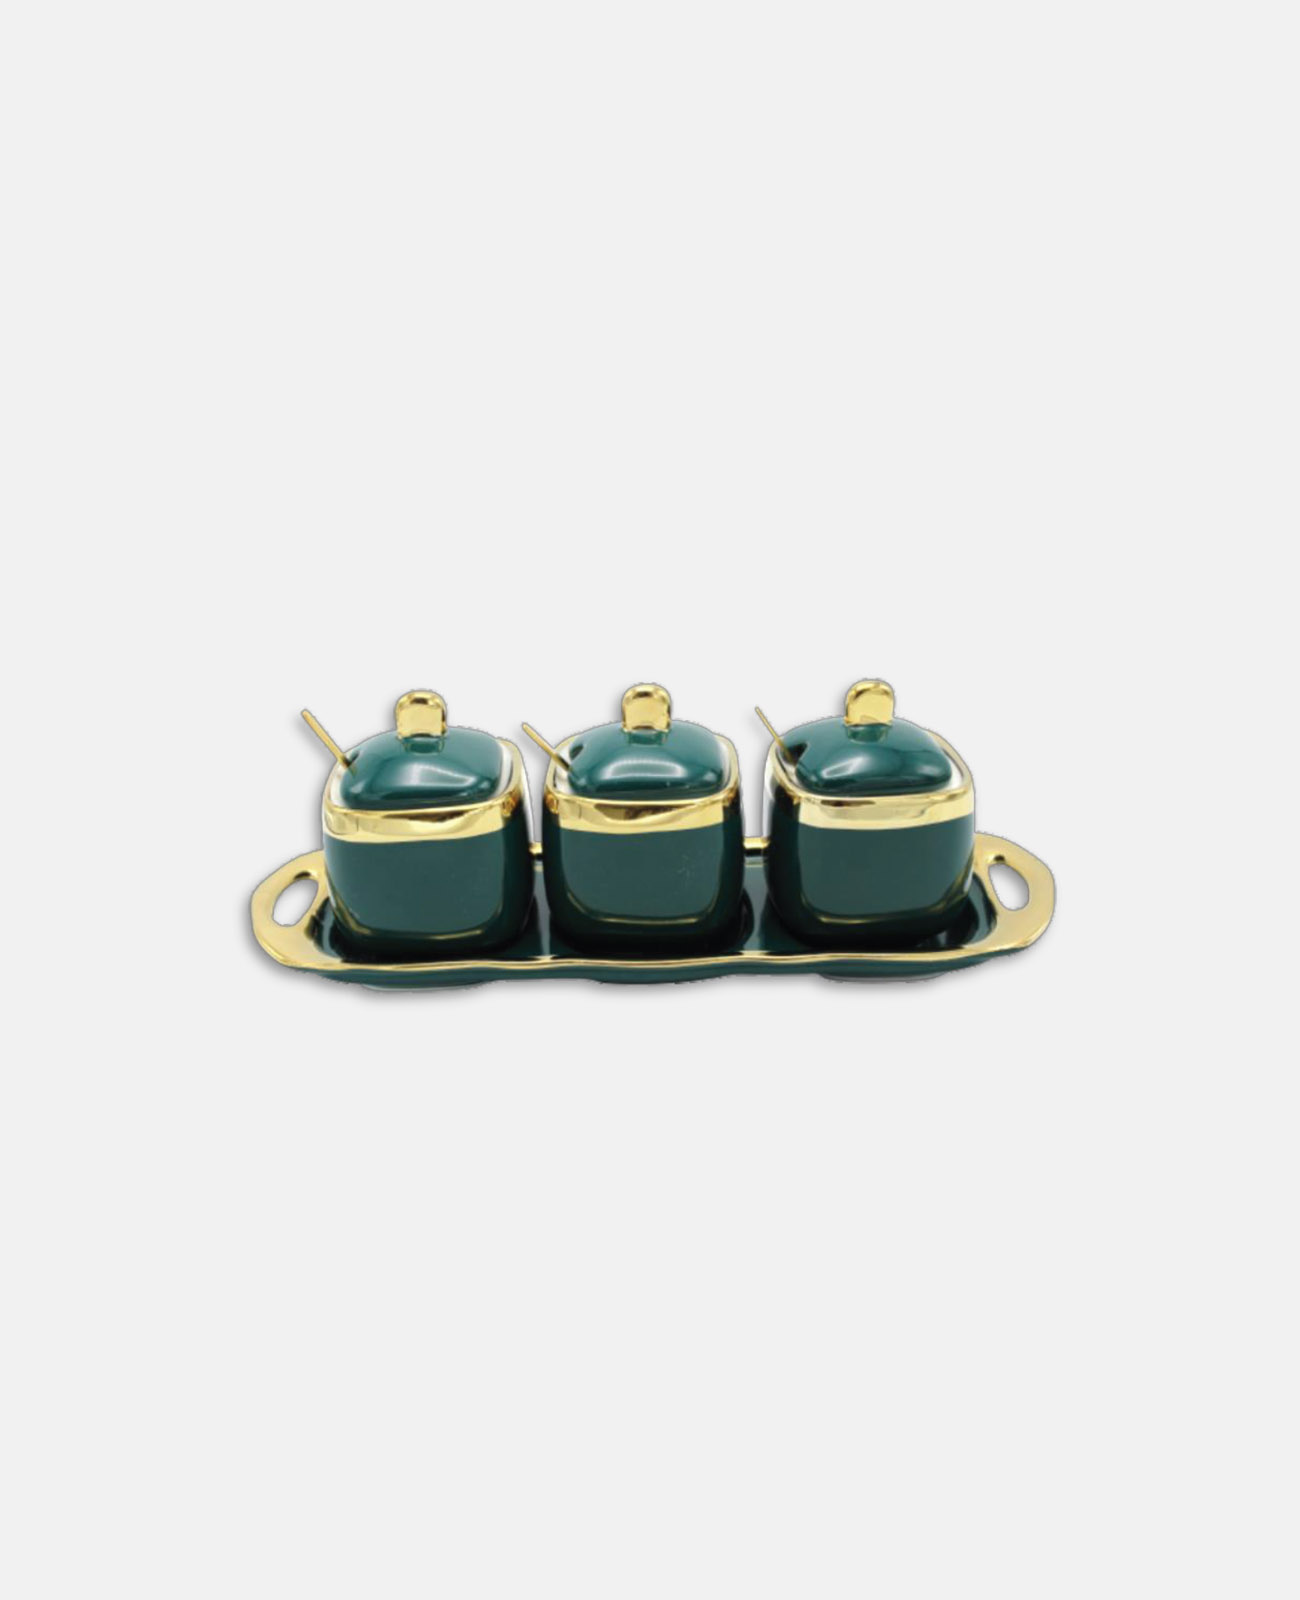 Green and Gold Elegant Kitchen Canister with Tray Set of 3/H 1-65